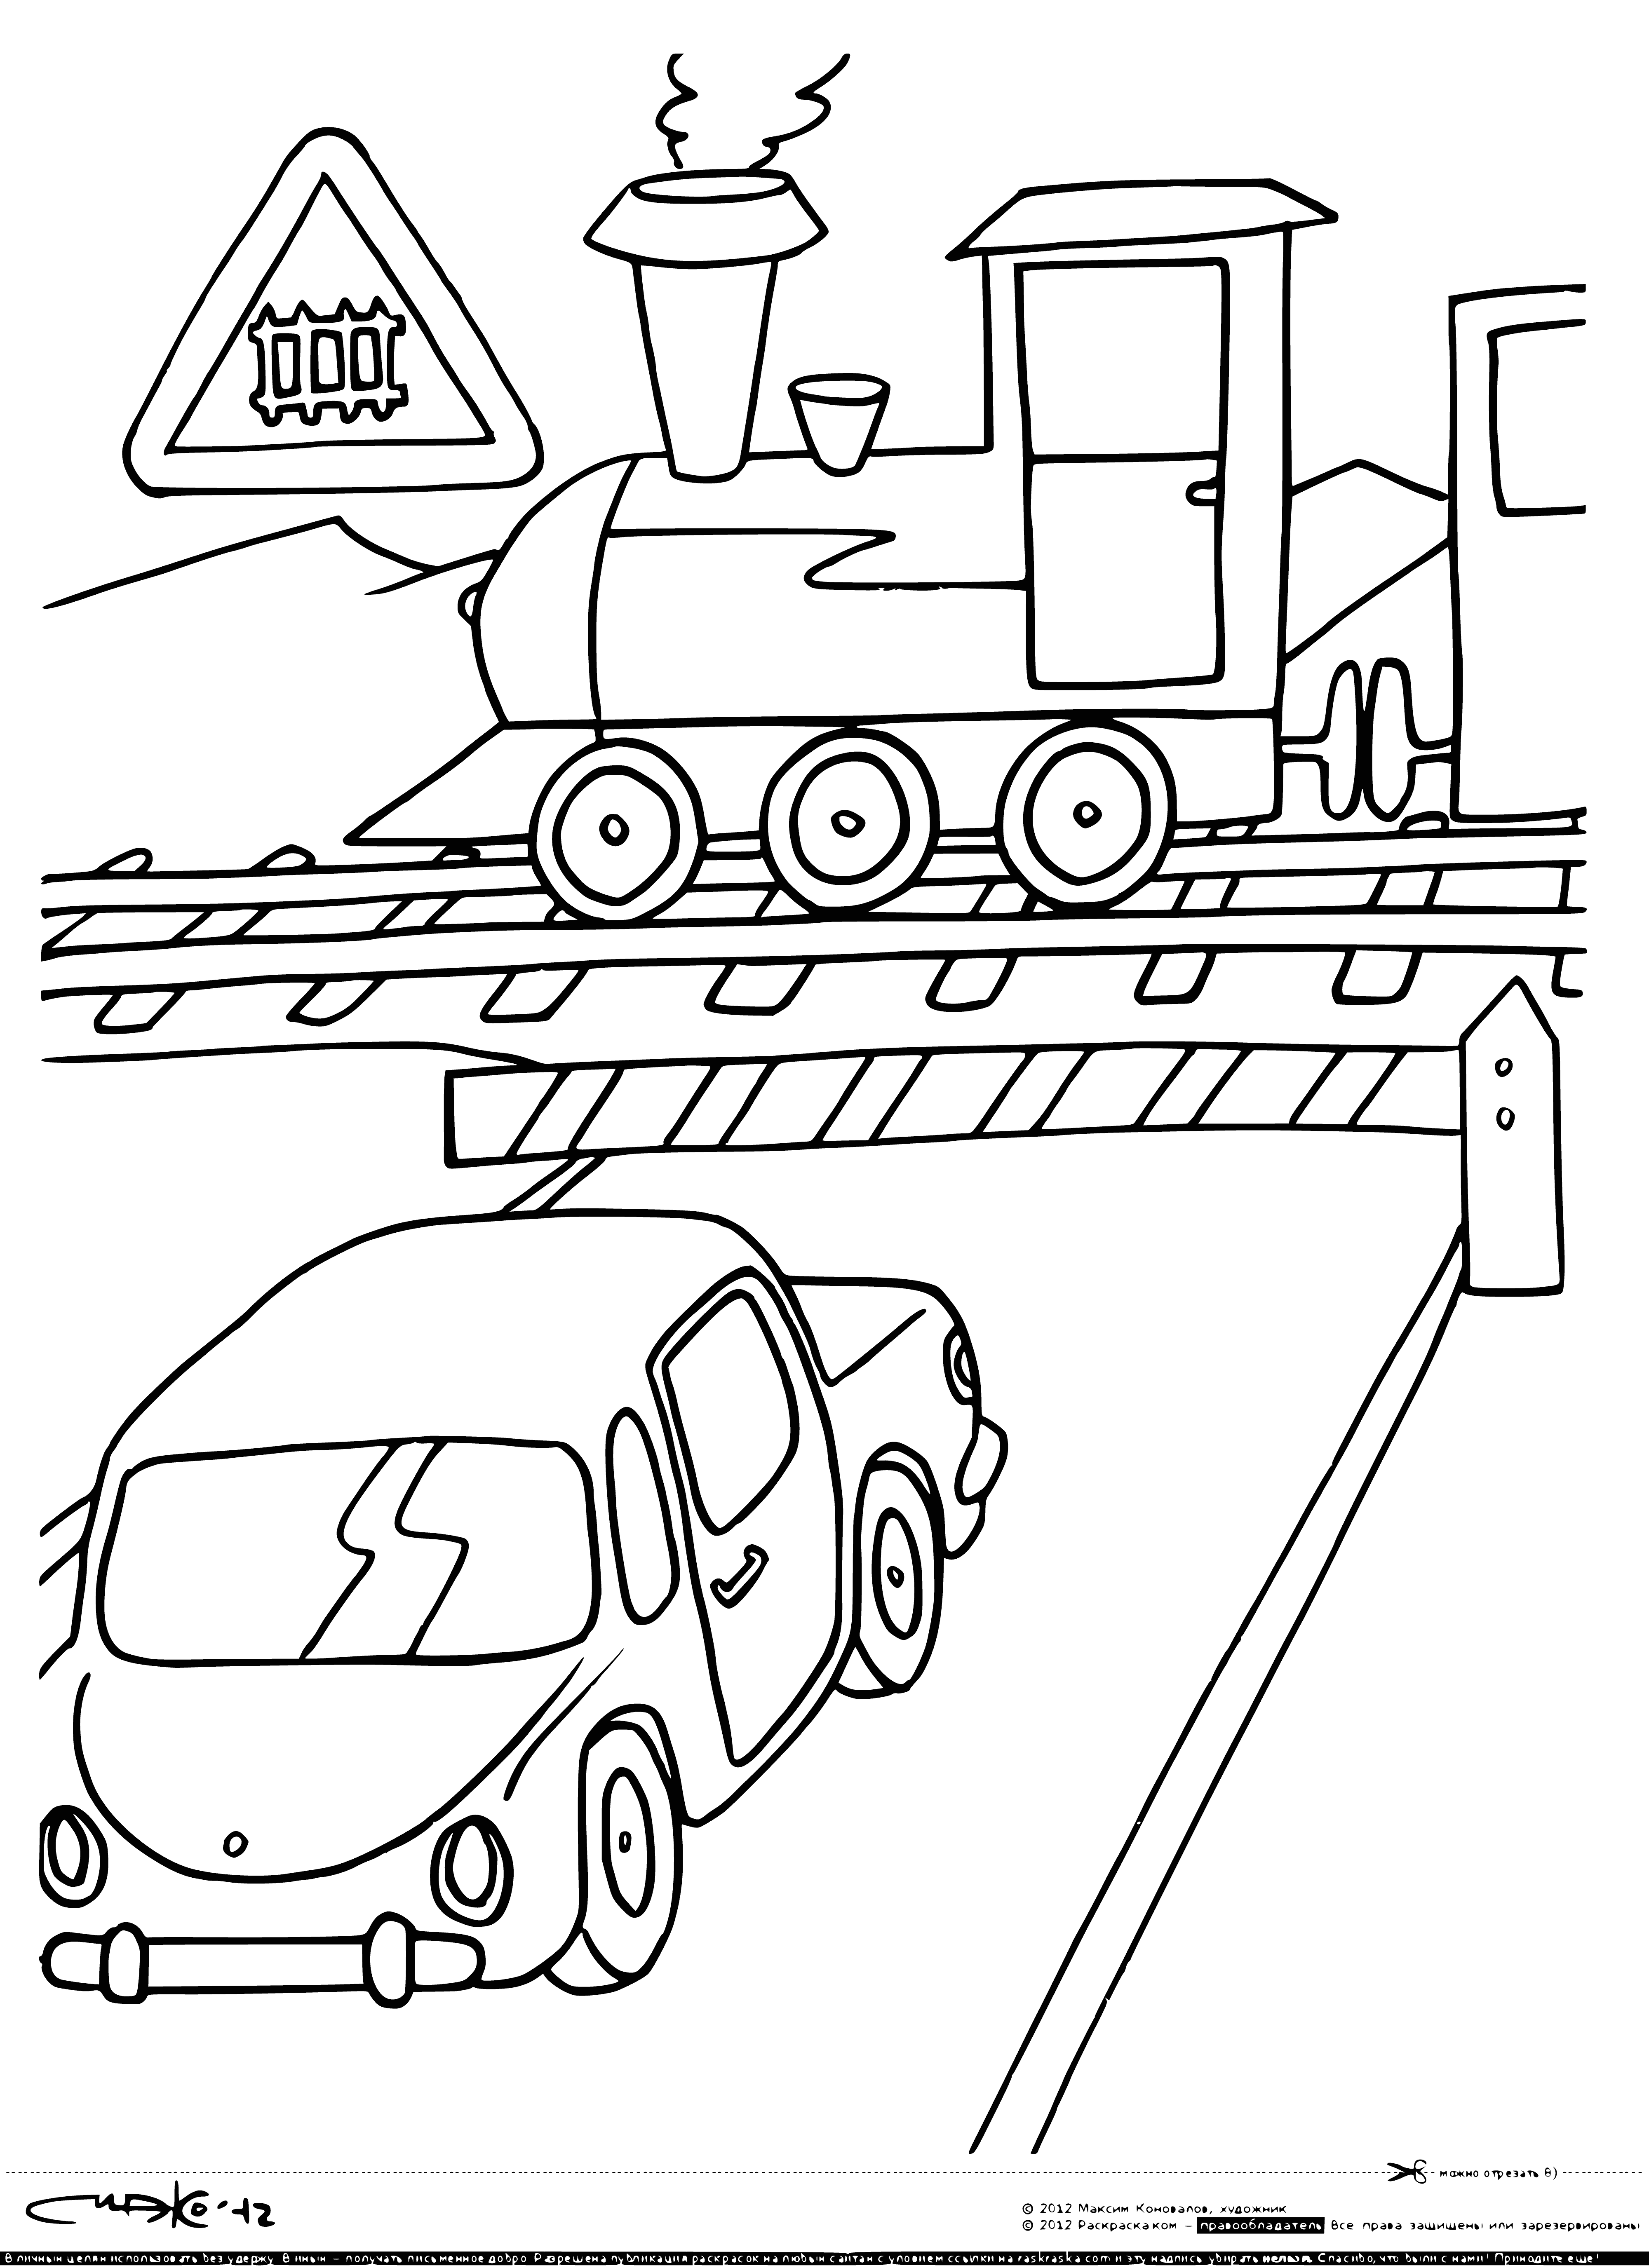 Railway crossing with a barrier coloring page